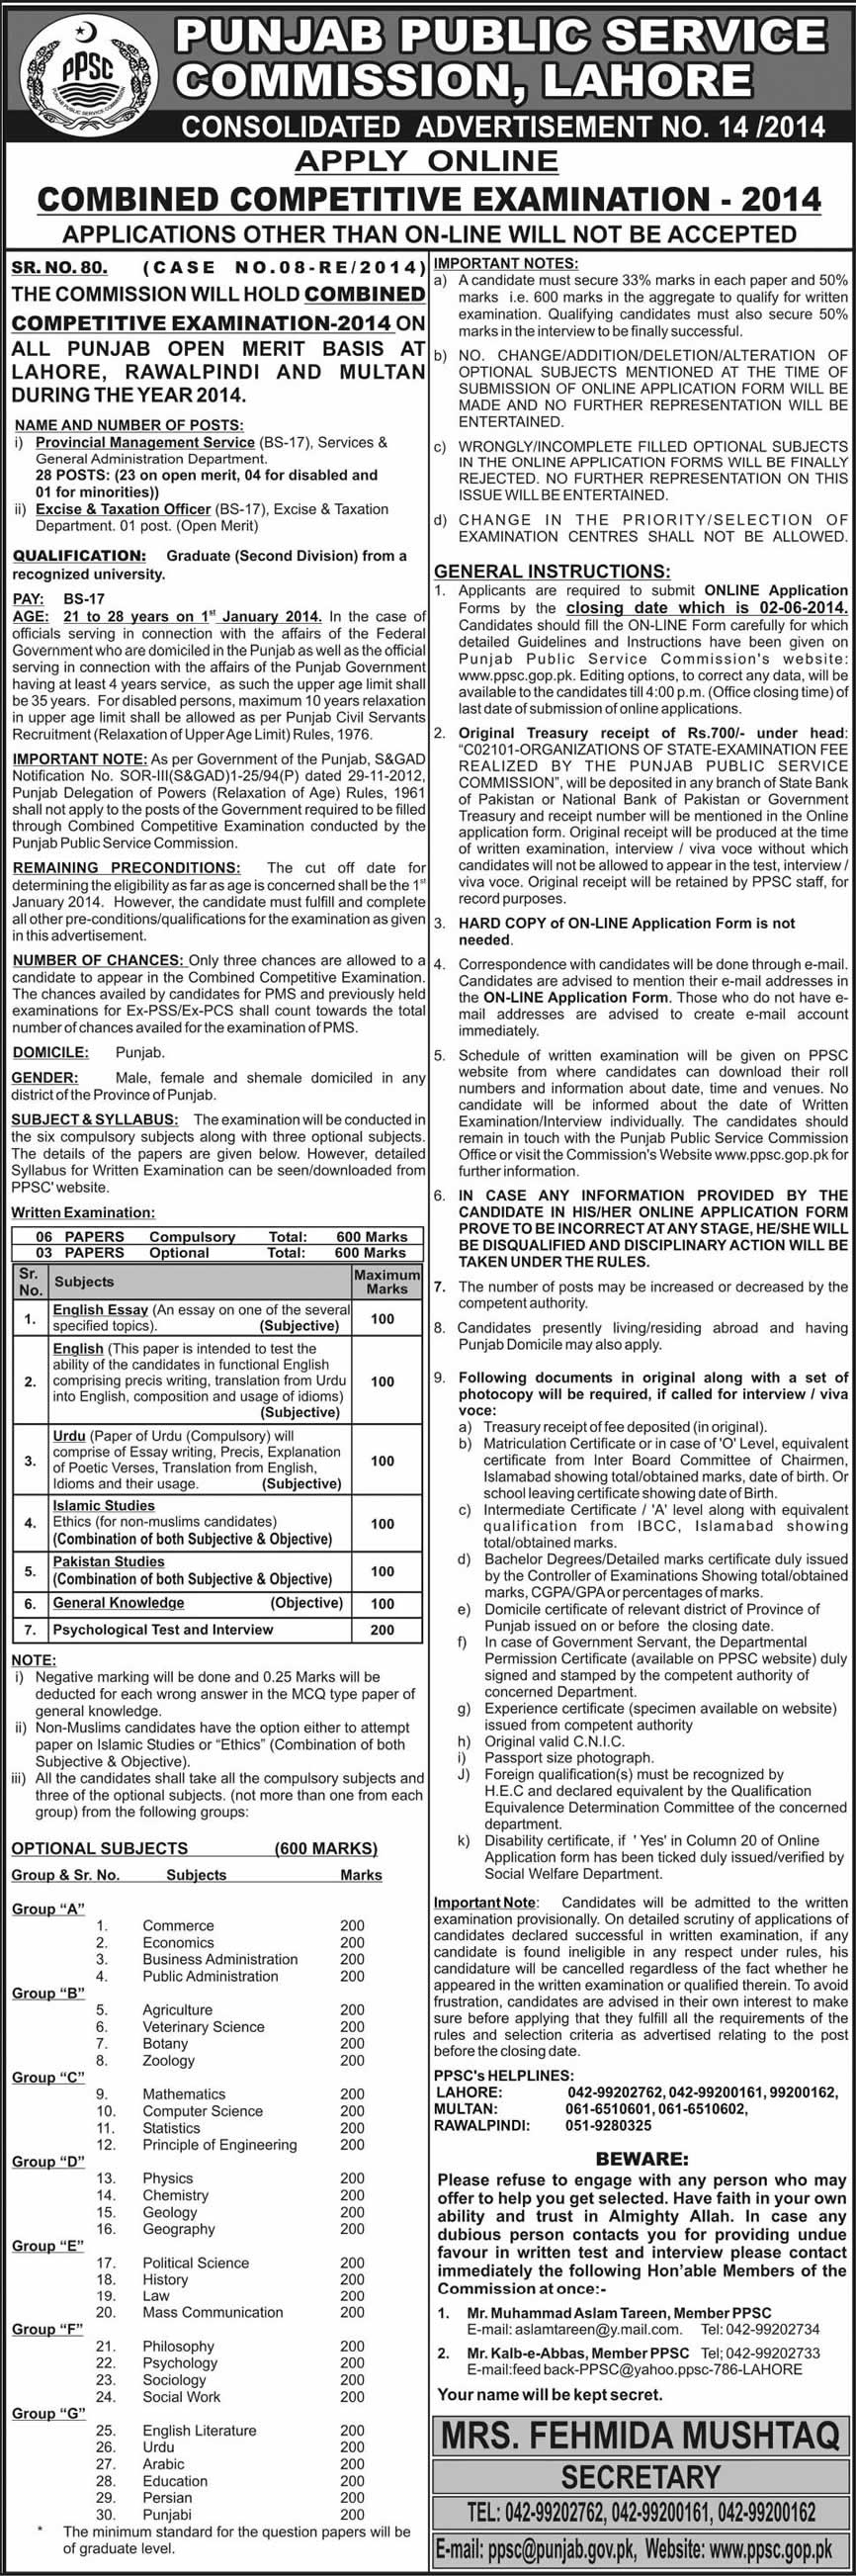 PPSC Jobs May 2014 Apply Online for Combined Competitive Examination